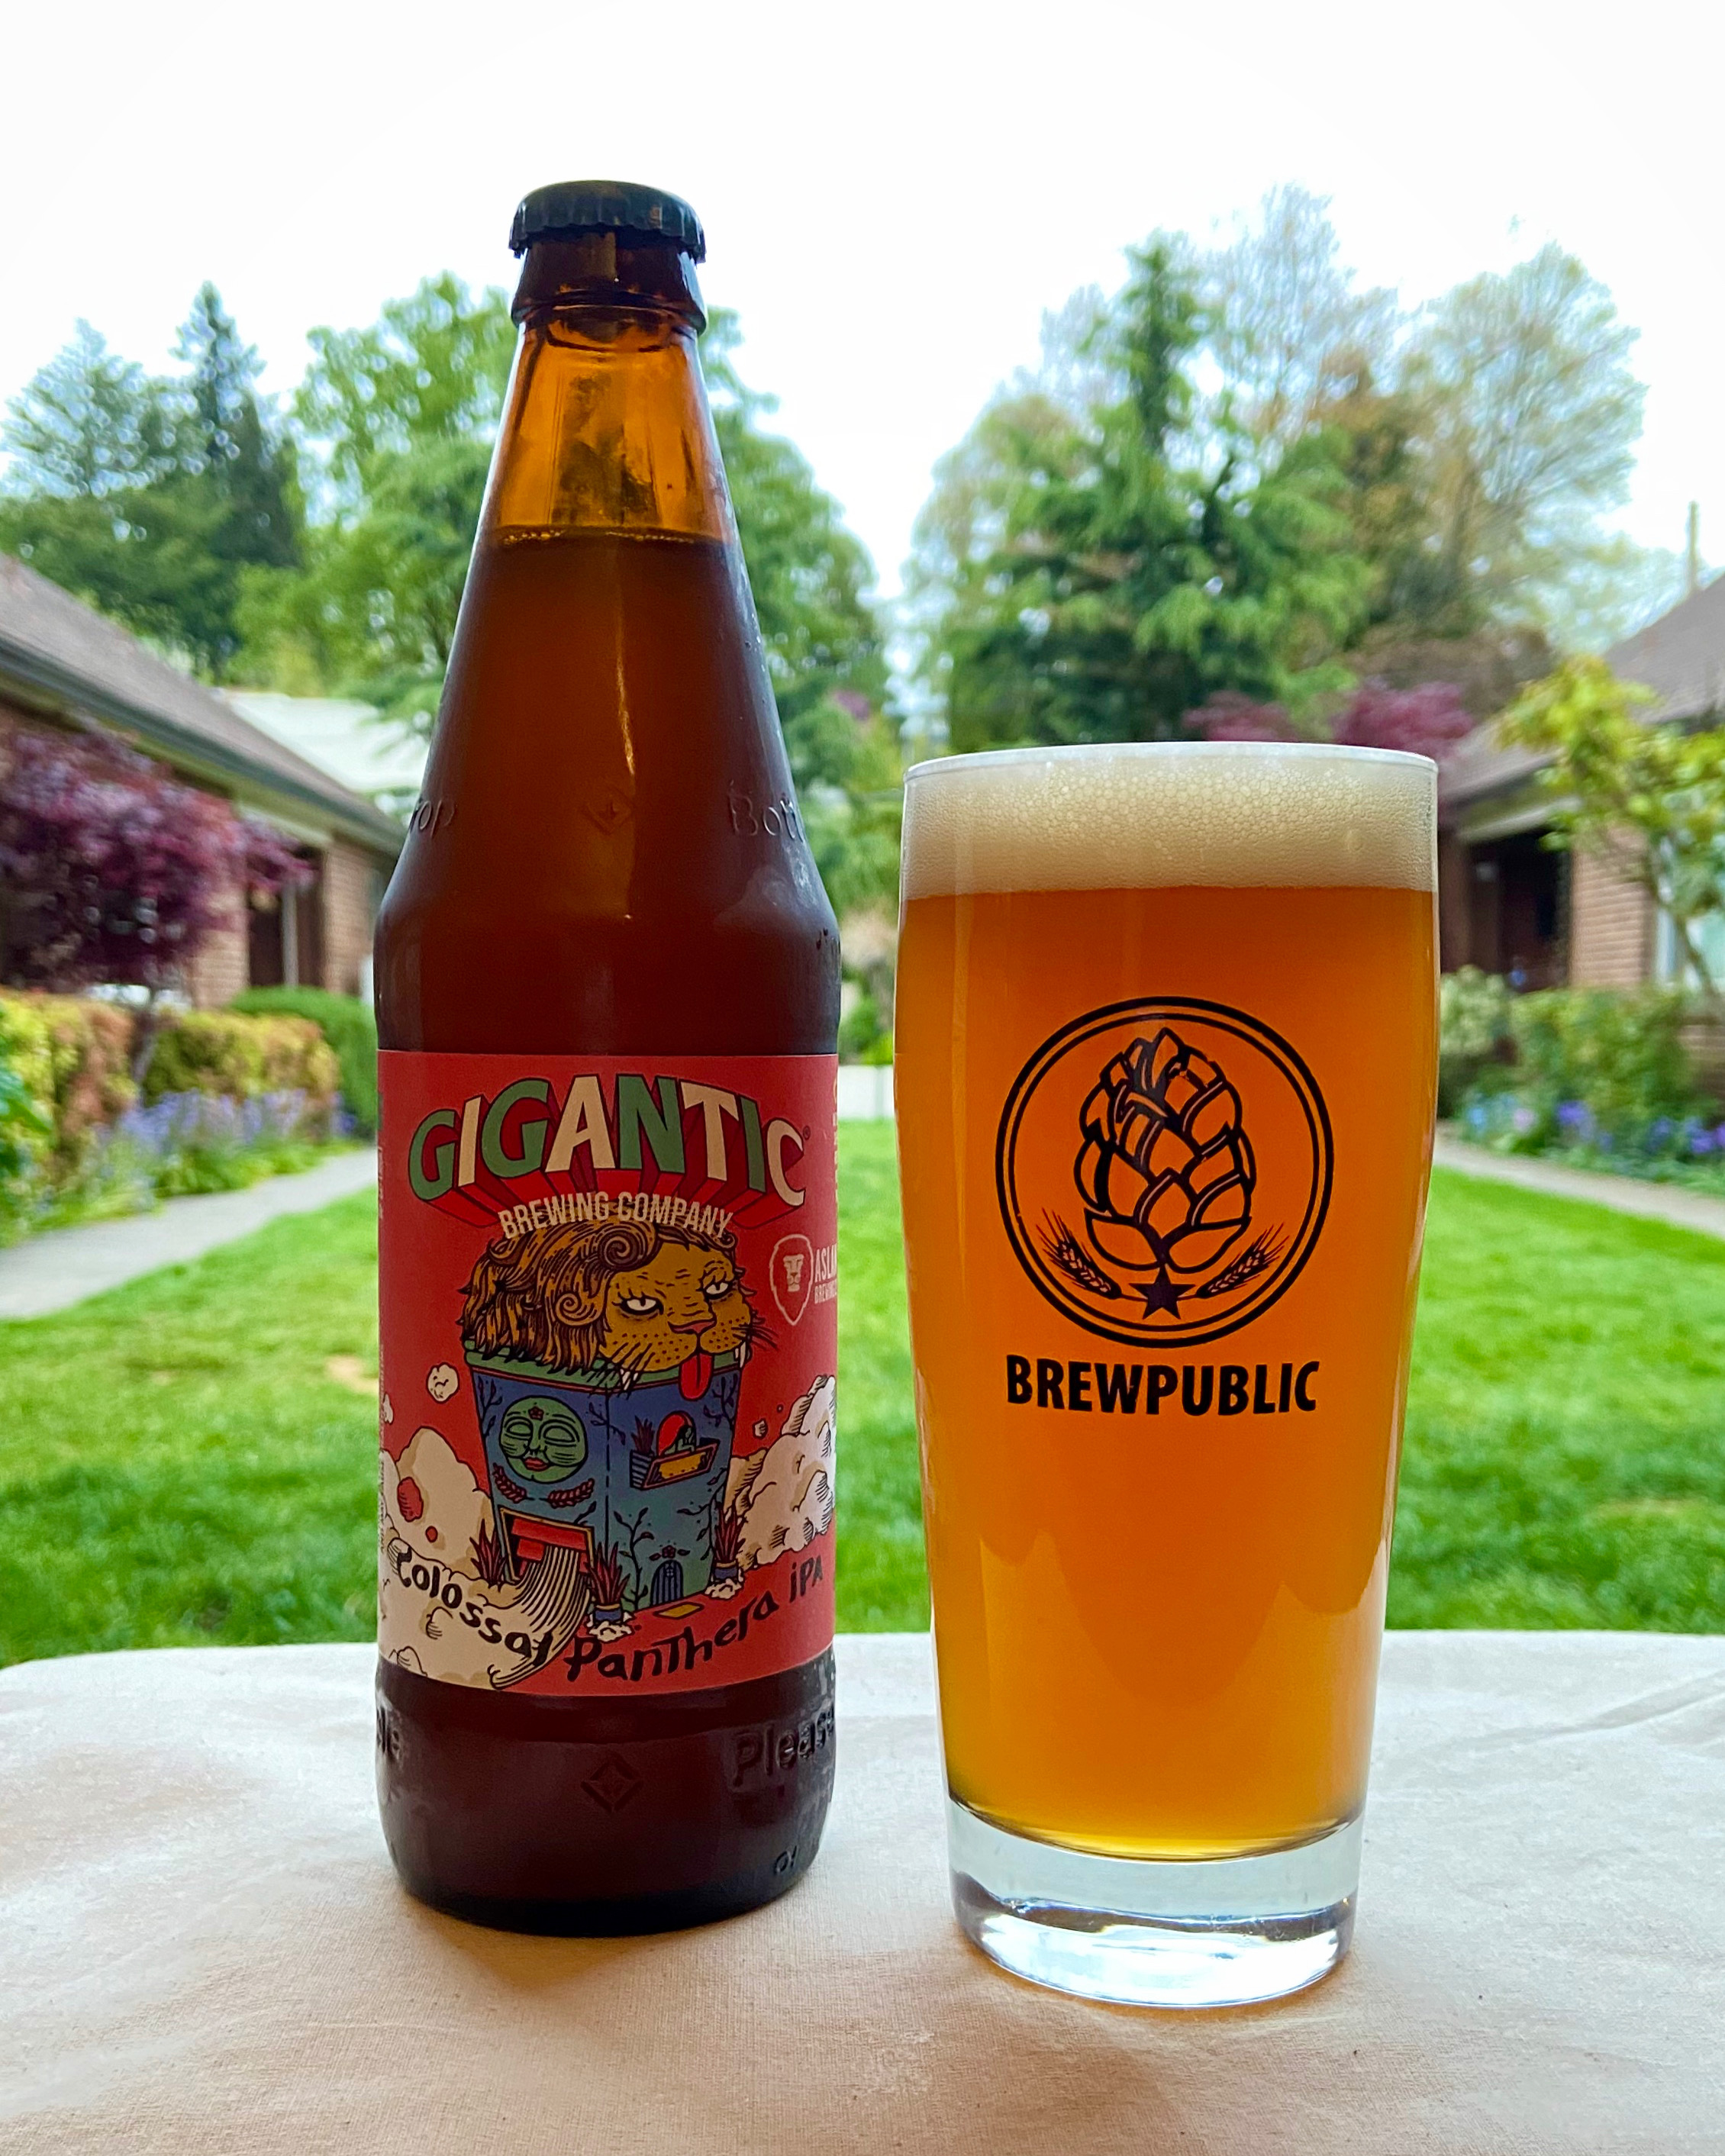 Gigantic Brewing collaborates with Aslan Brewing on the new Colossal Panthera IPA.